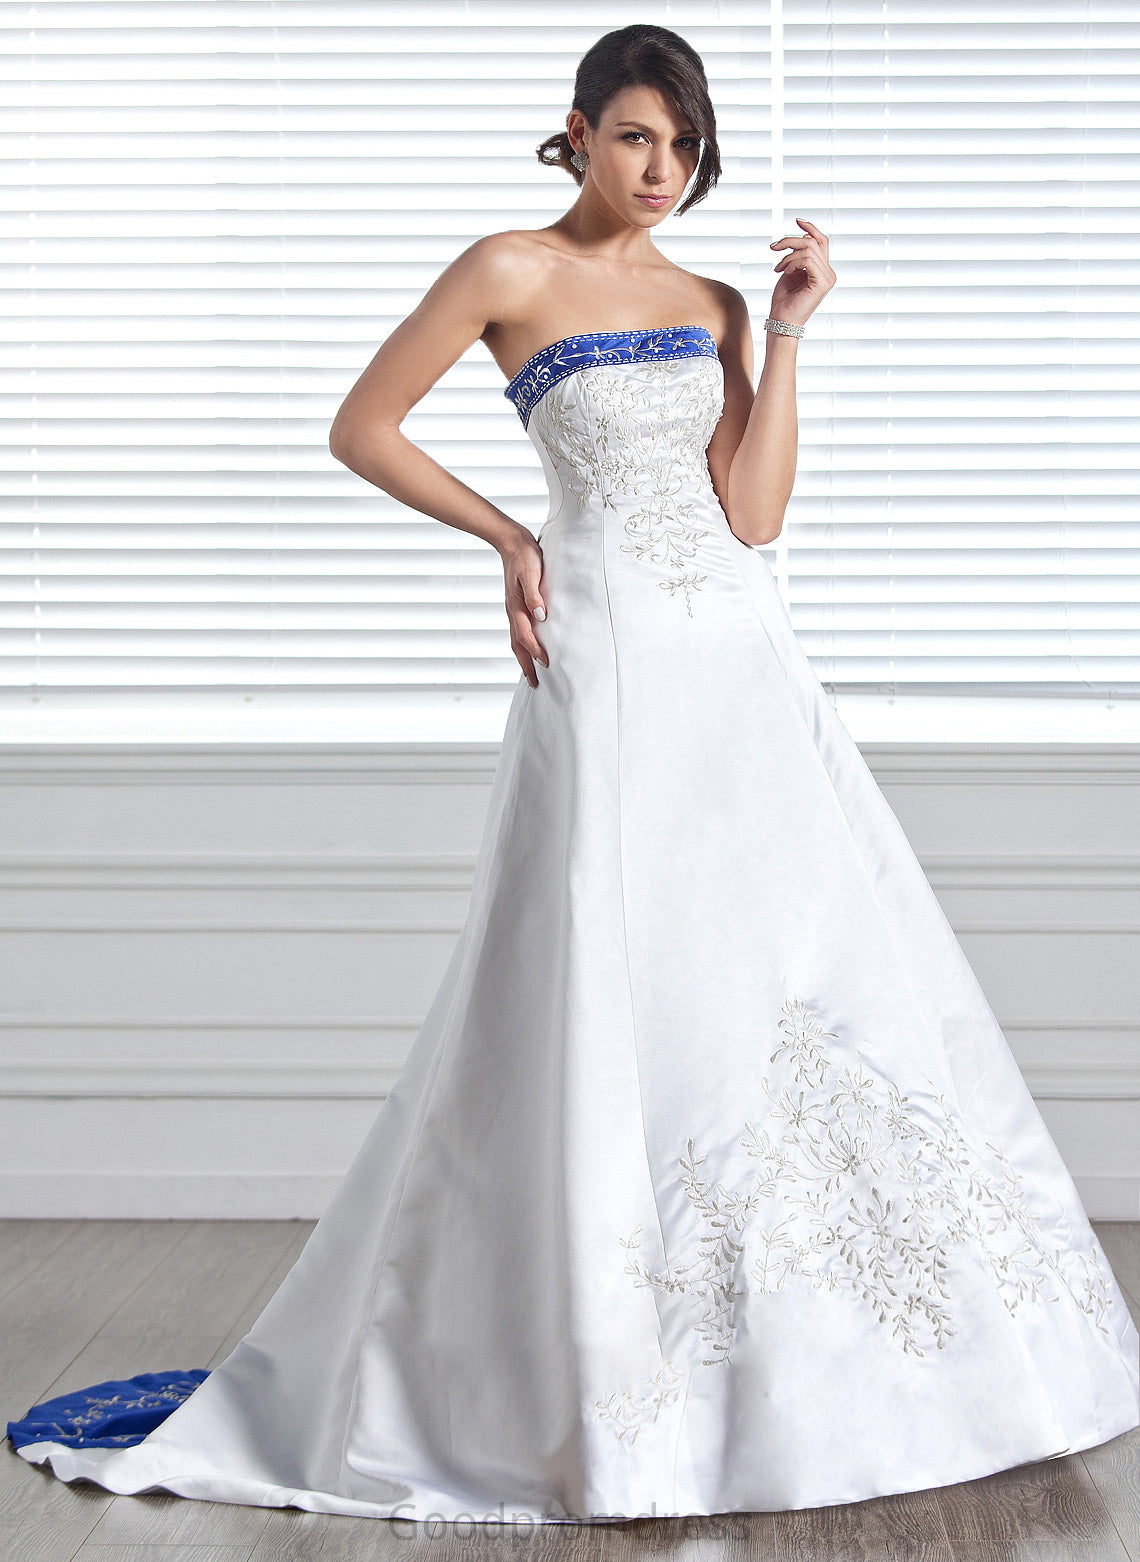 Court With Dress Ball-Gown/Princess Wedding Beading Wedding Dresses Sash Strapless Satin Aubree Embroidered Train